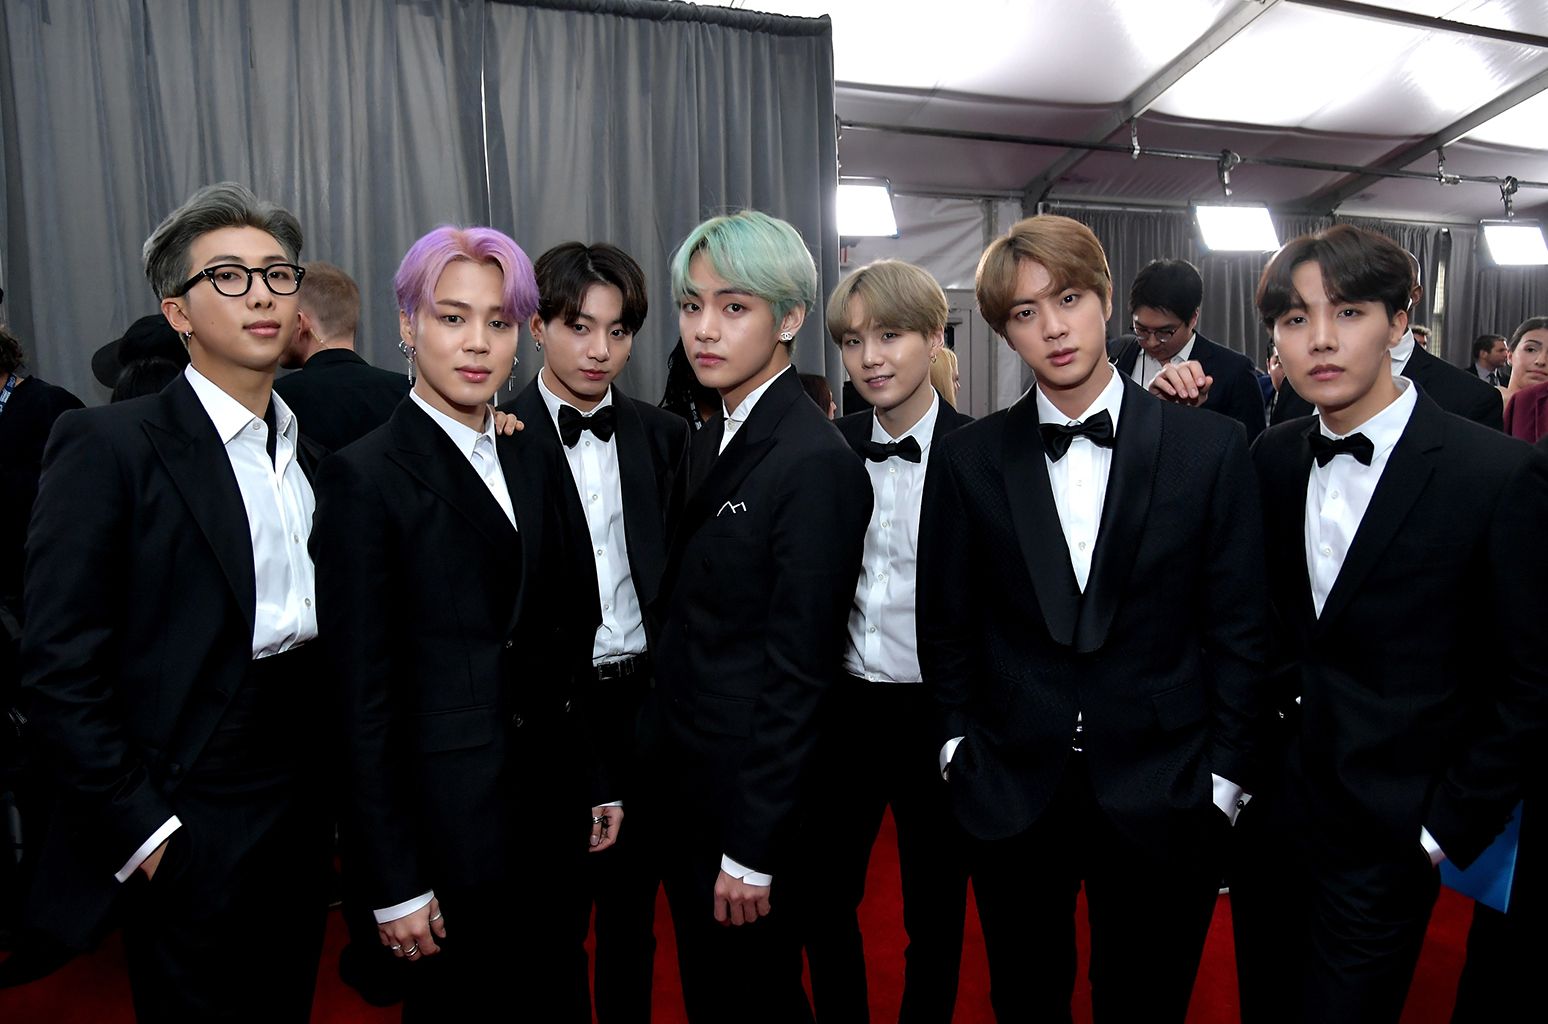 Free download BTS At The 2019 Grammys Red Carpet See The Photo Billboard [1548x1024] for your Desktop, Mobile & Tablet. Explore Grammys 2019 Wallpaper. Grammys 2019 Wallpaper, Grammys Background, Wallpaper 2019